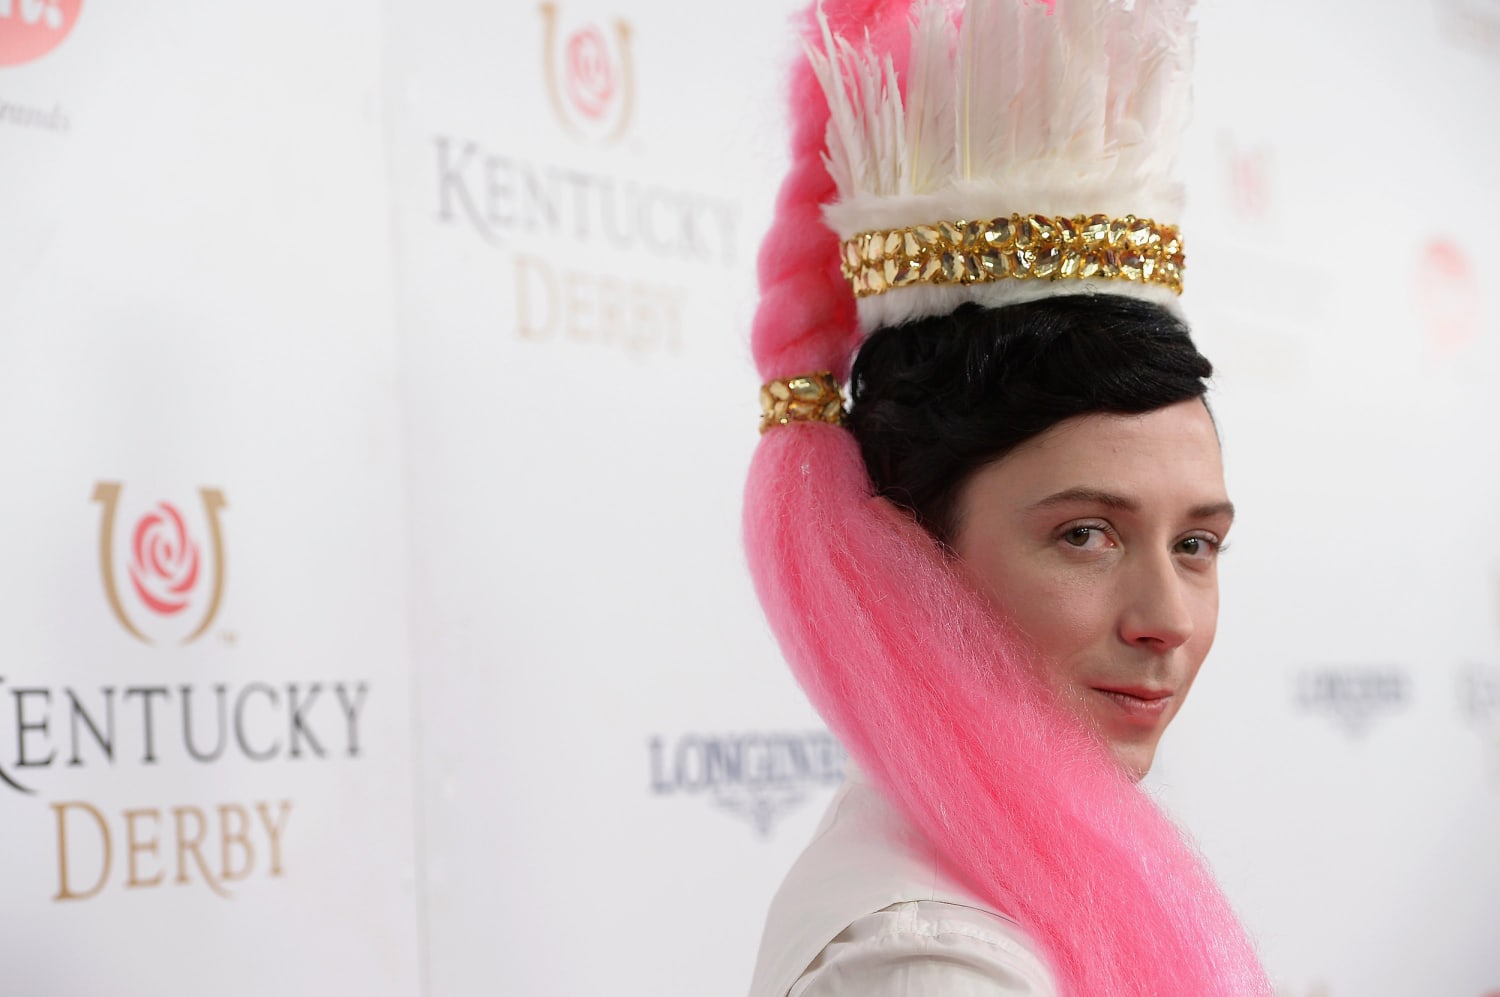 How to stand up to bullies, according to Johnny Weir